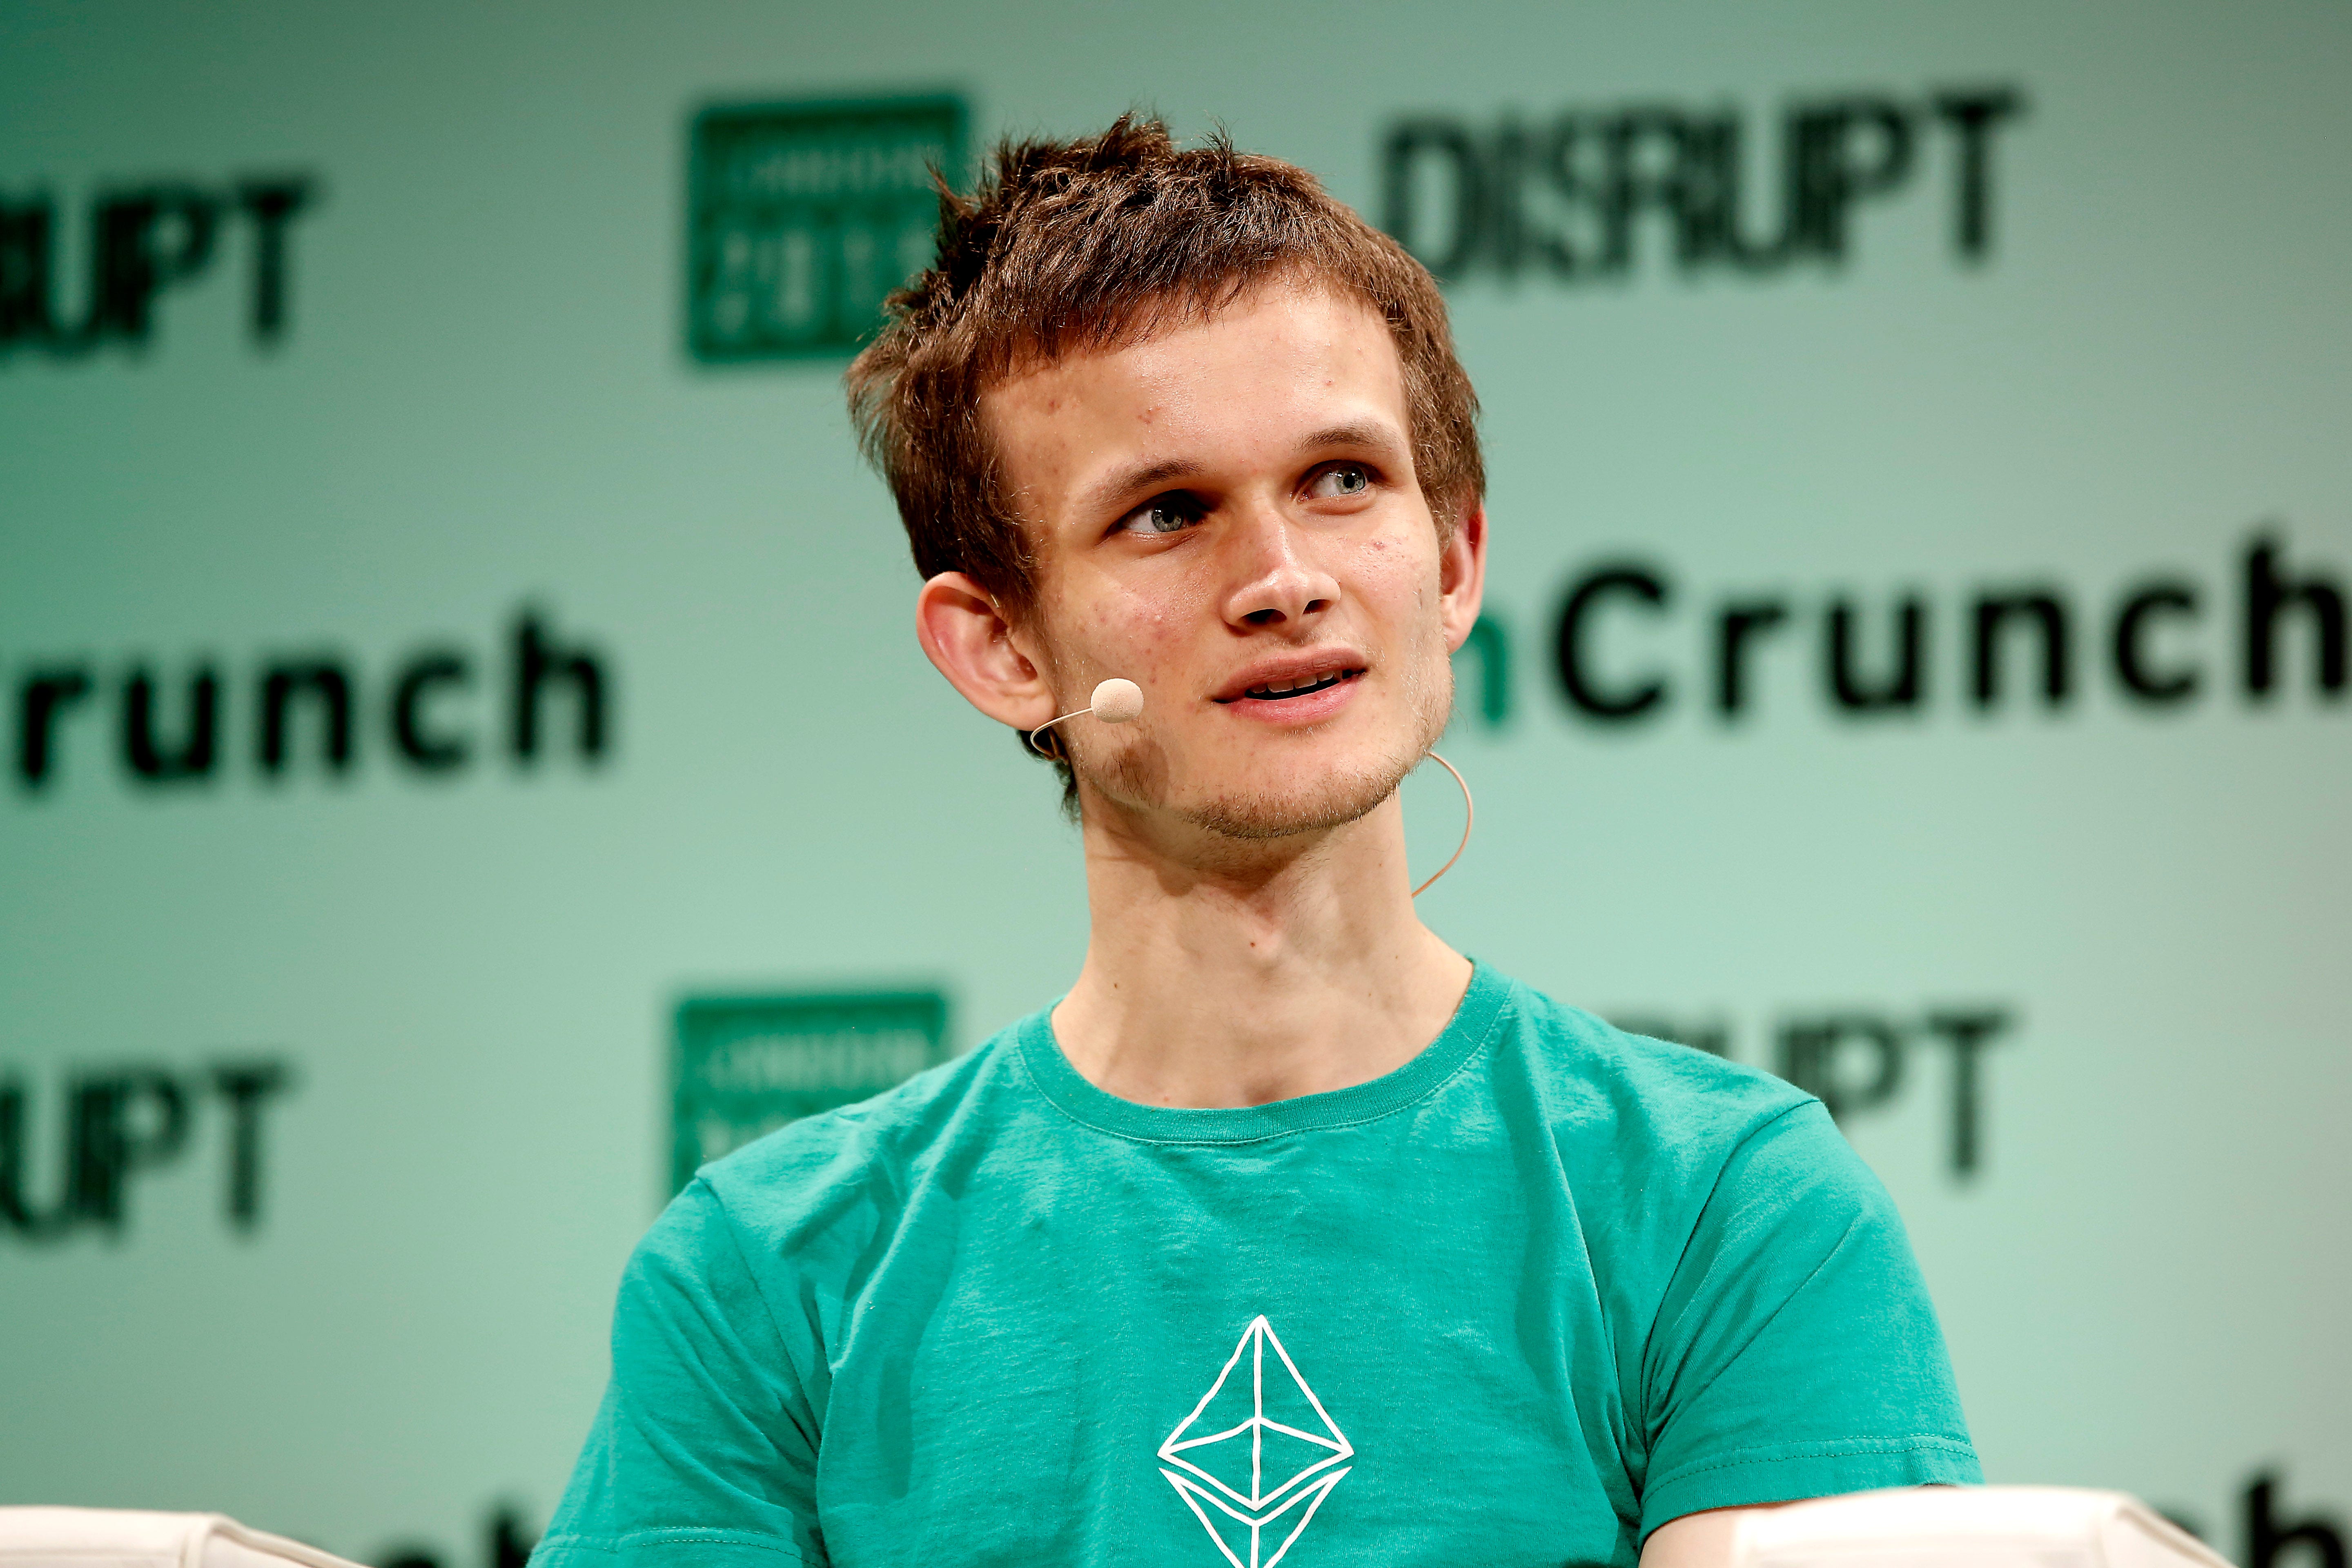 'Sinister Scam' Alert: Is This Vitalik Buterin Instagram Account With Over 574,000 Followers Really Genuine?